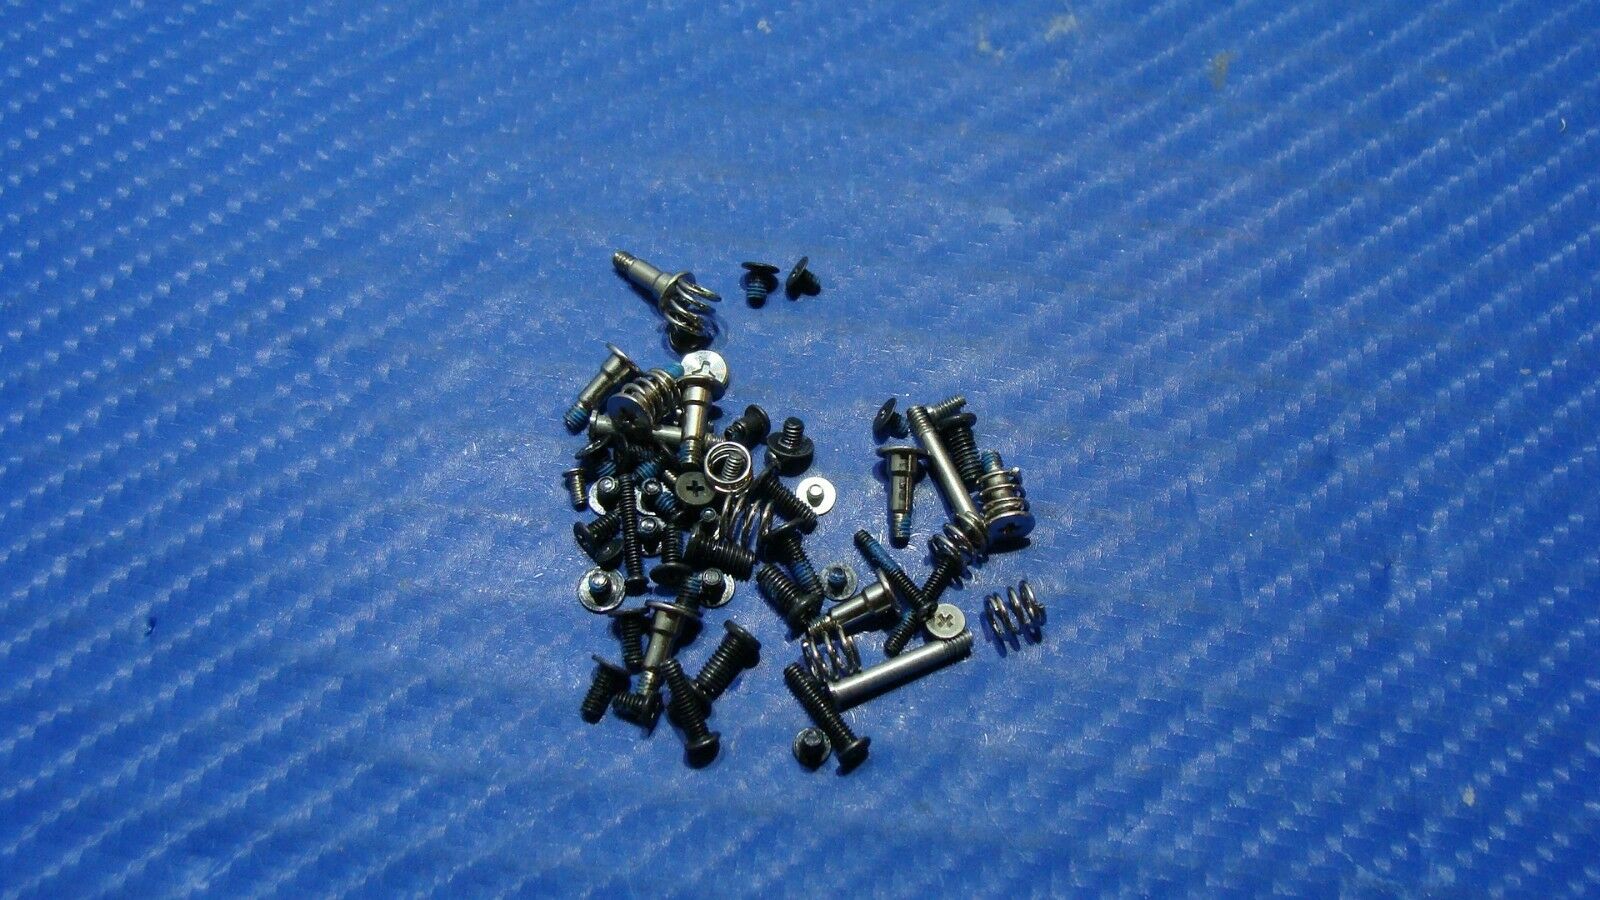 MacBook Pro 15" A1286 Late 2008 MB470LL/A Genuine Laptop Screw Set GS19683 GLP* - Laptop Parts - Buy Authentic Computer Parts - Top Seller Ebay